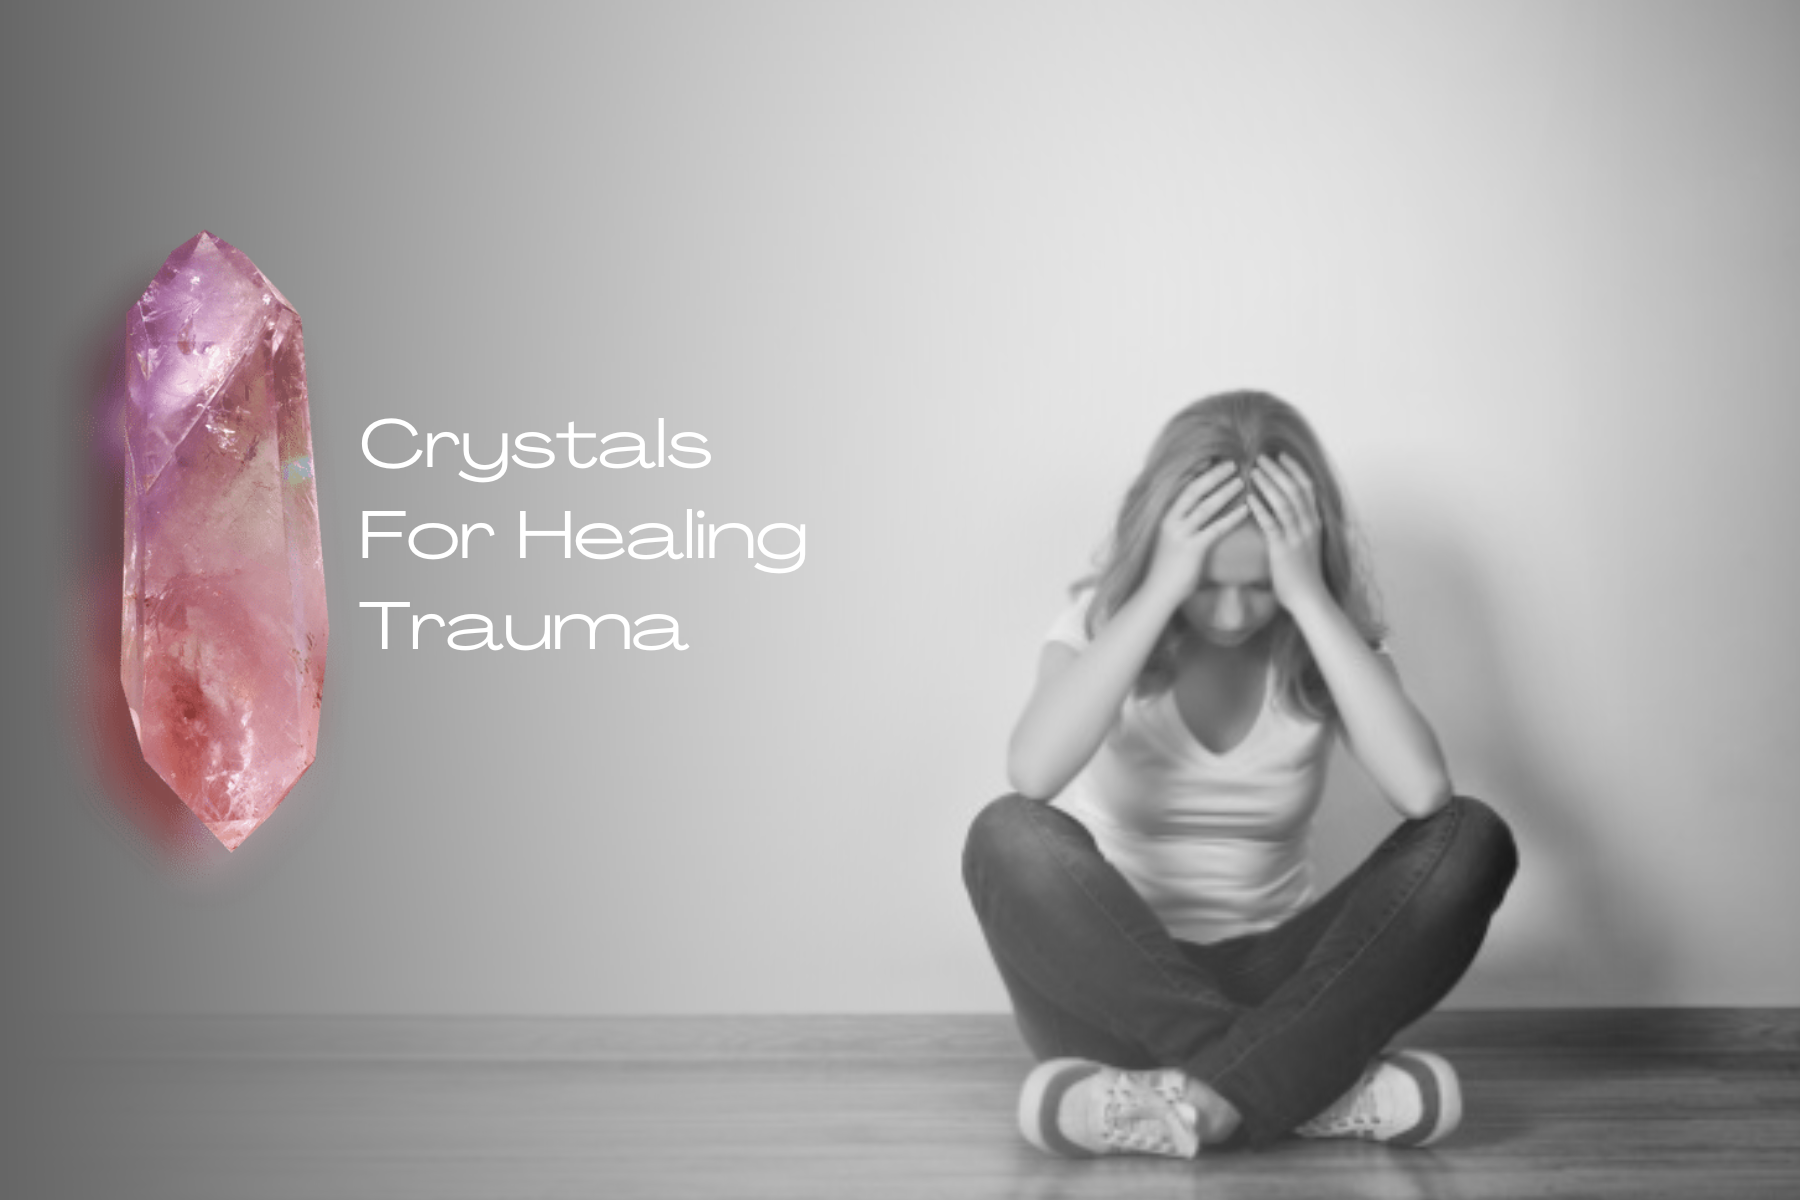 Crystals For Healing Trauma - Is This A New Professional Medication Alternative?